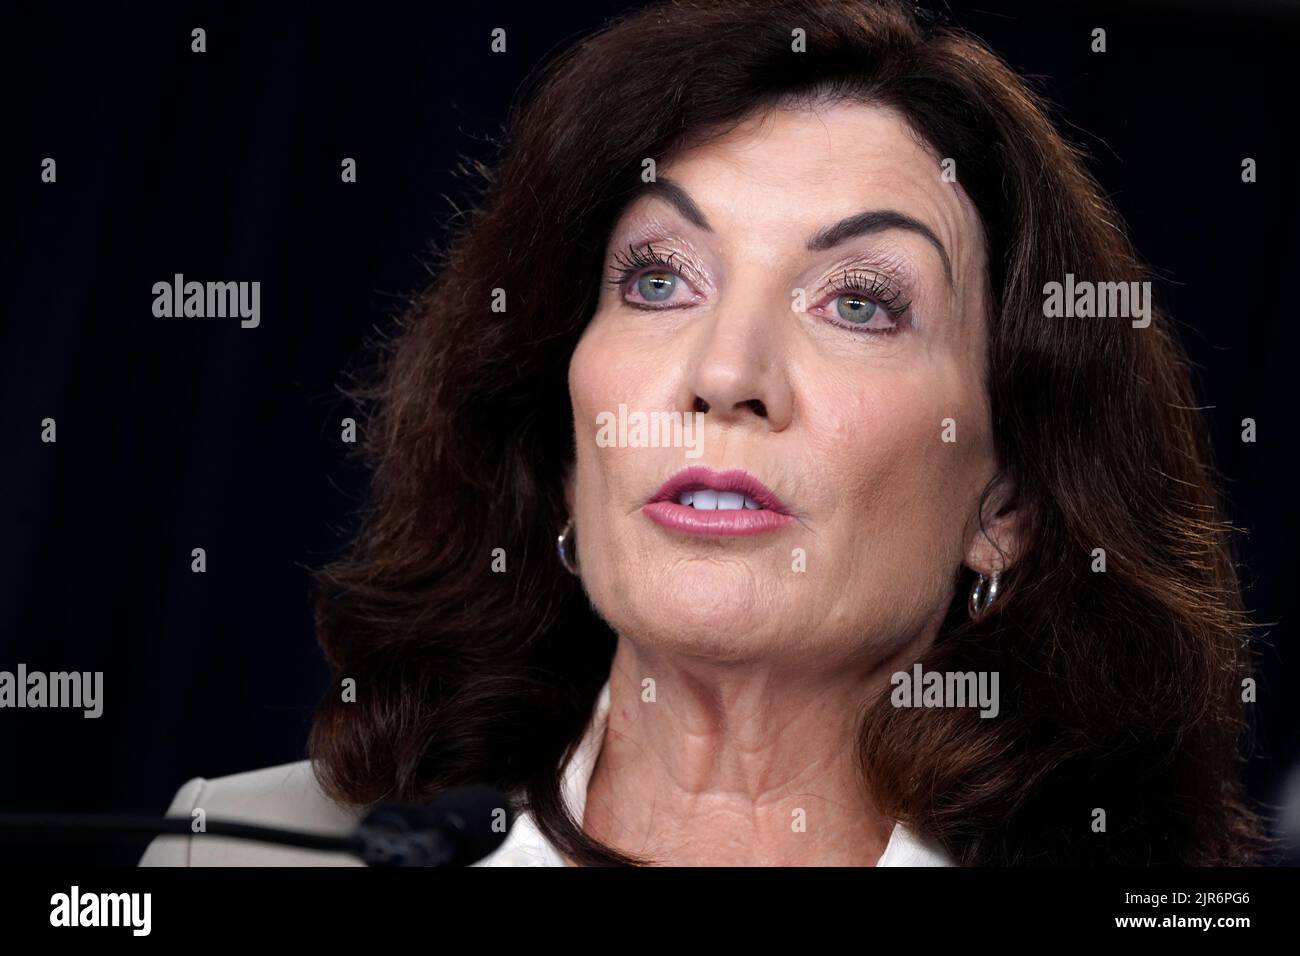 New York City, USA. 22nd Aug, 2022. New York State Governor Kathy Hochul speaks during a health department press briefing in Midtown on August 22, 2022 in New York City, USA. Governor Hochul reiterated COVID-19 Federal CDC guidelines for schools while the NYS Health commissioner outlined necessary steps to combatting Monkeypox and the resurgence of Polio. New York State Governor Kathy Hochul ( Photo by John Lamparski/Sipa USA) Credit: Sipa USA/Alamy Live News Stock Photo